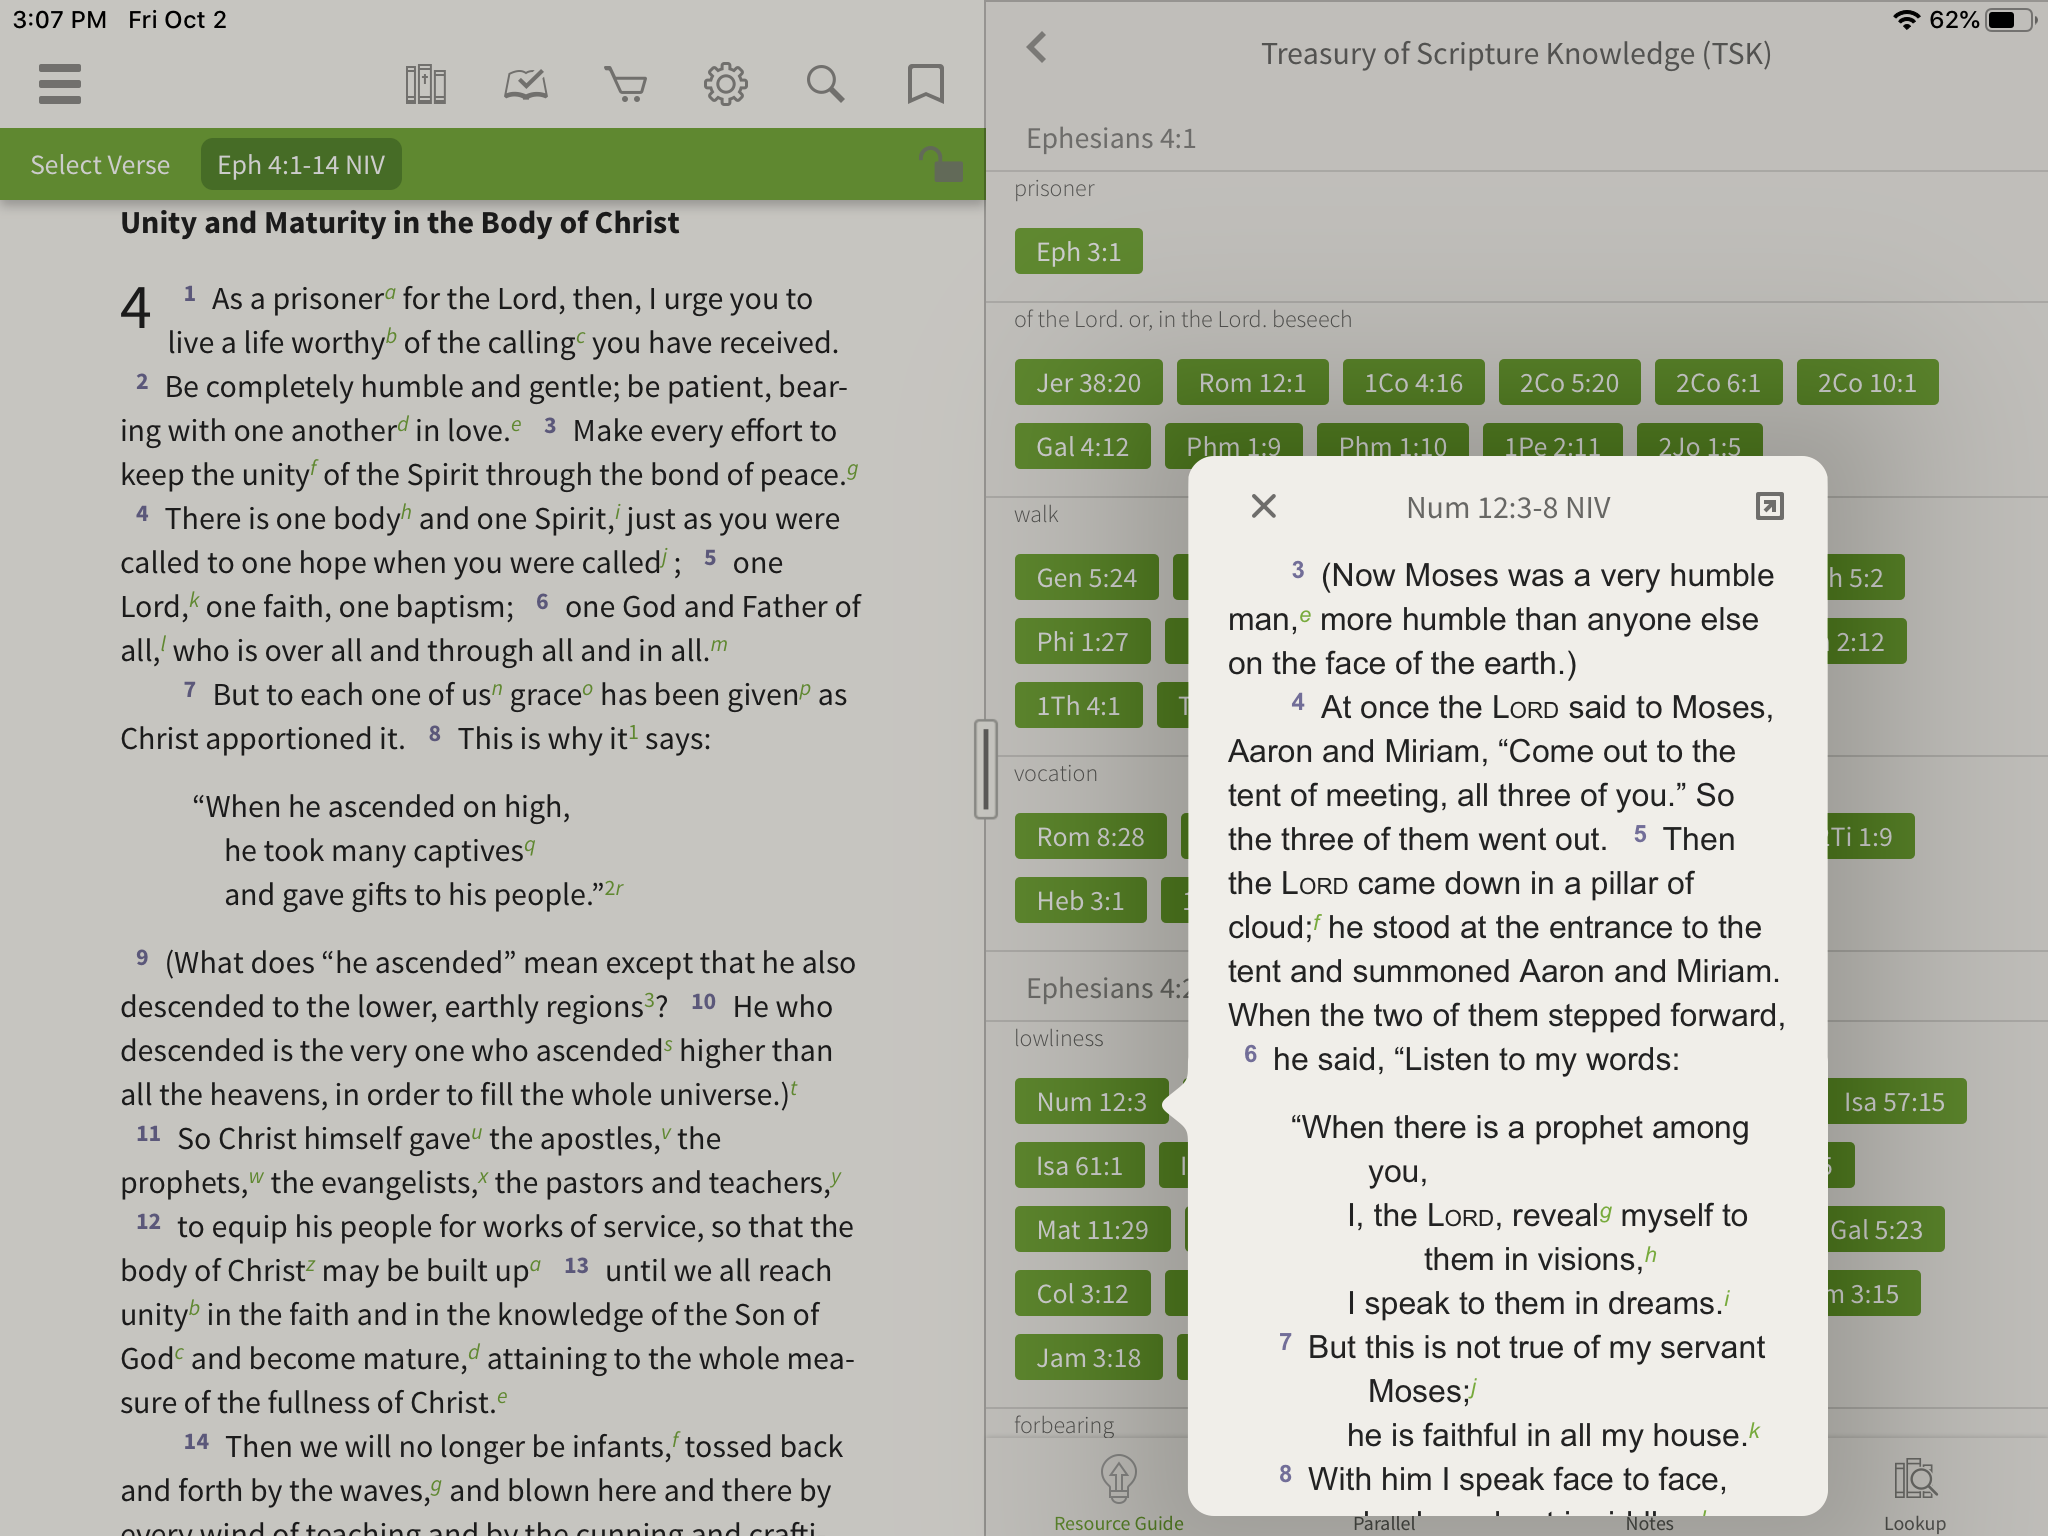 Opening a Cross Reference in the Olive Tree Bible App